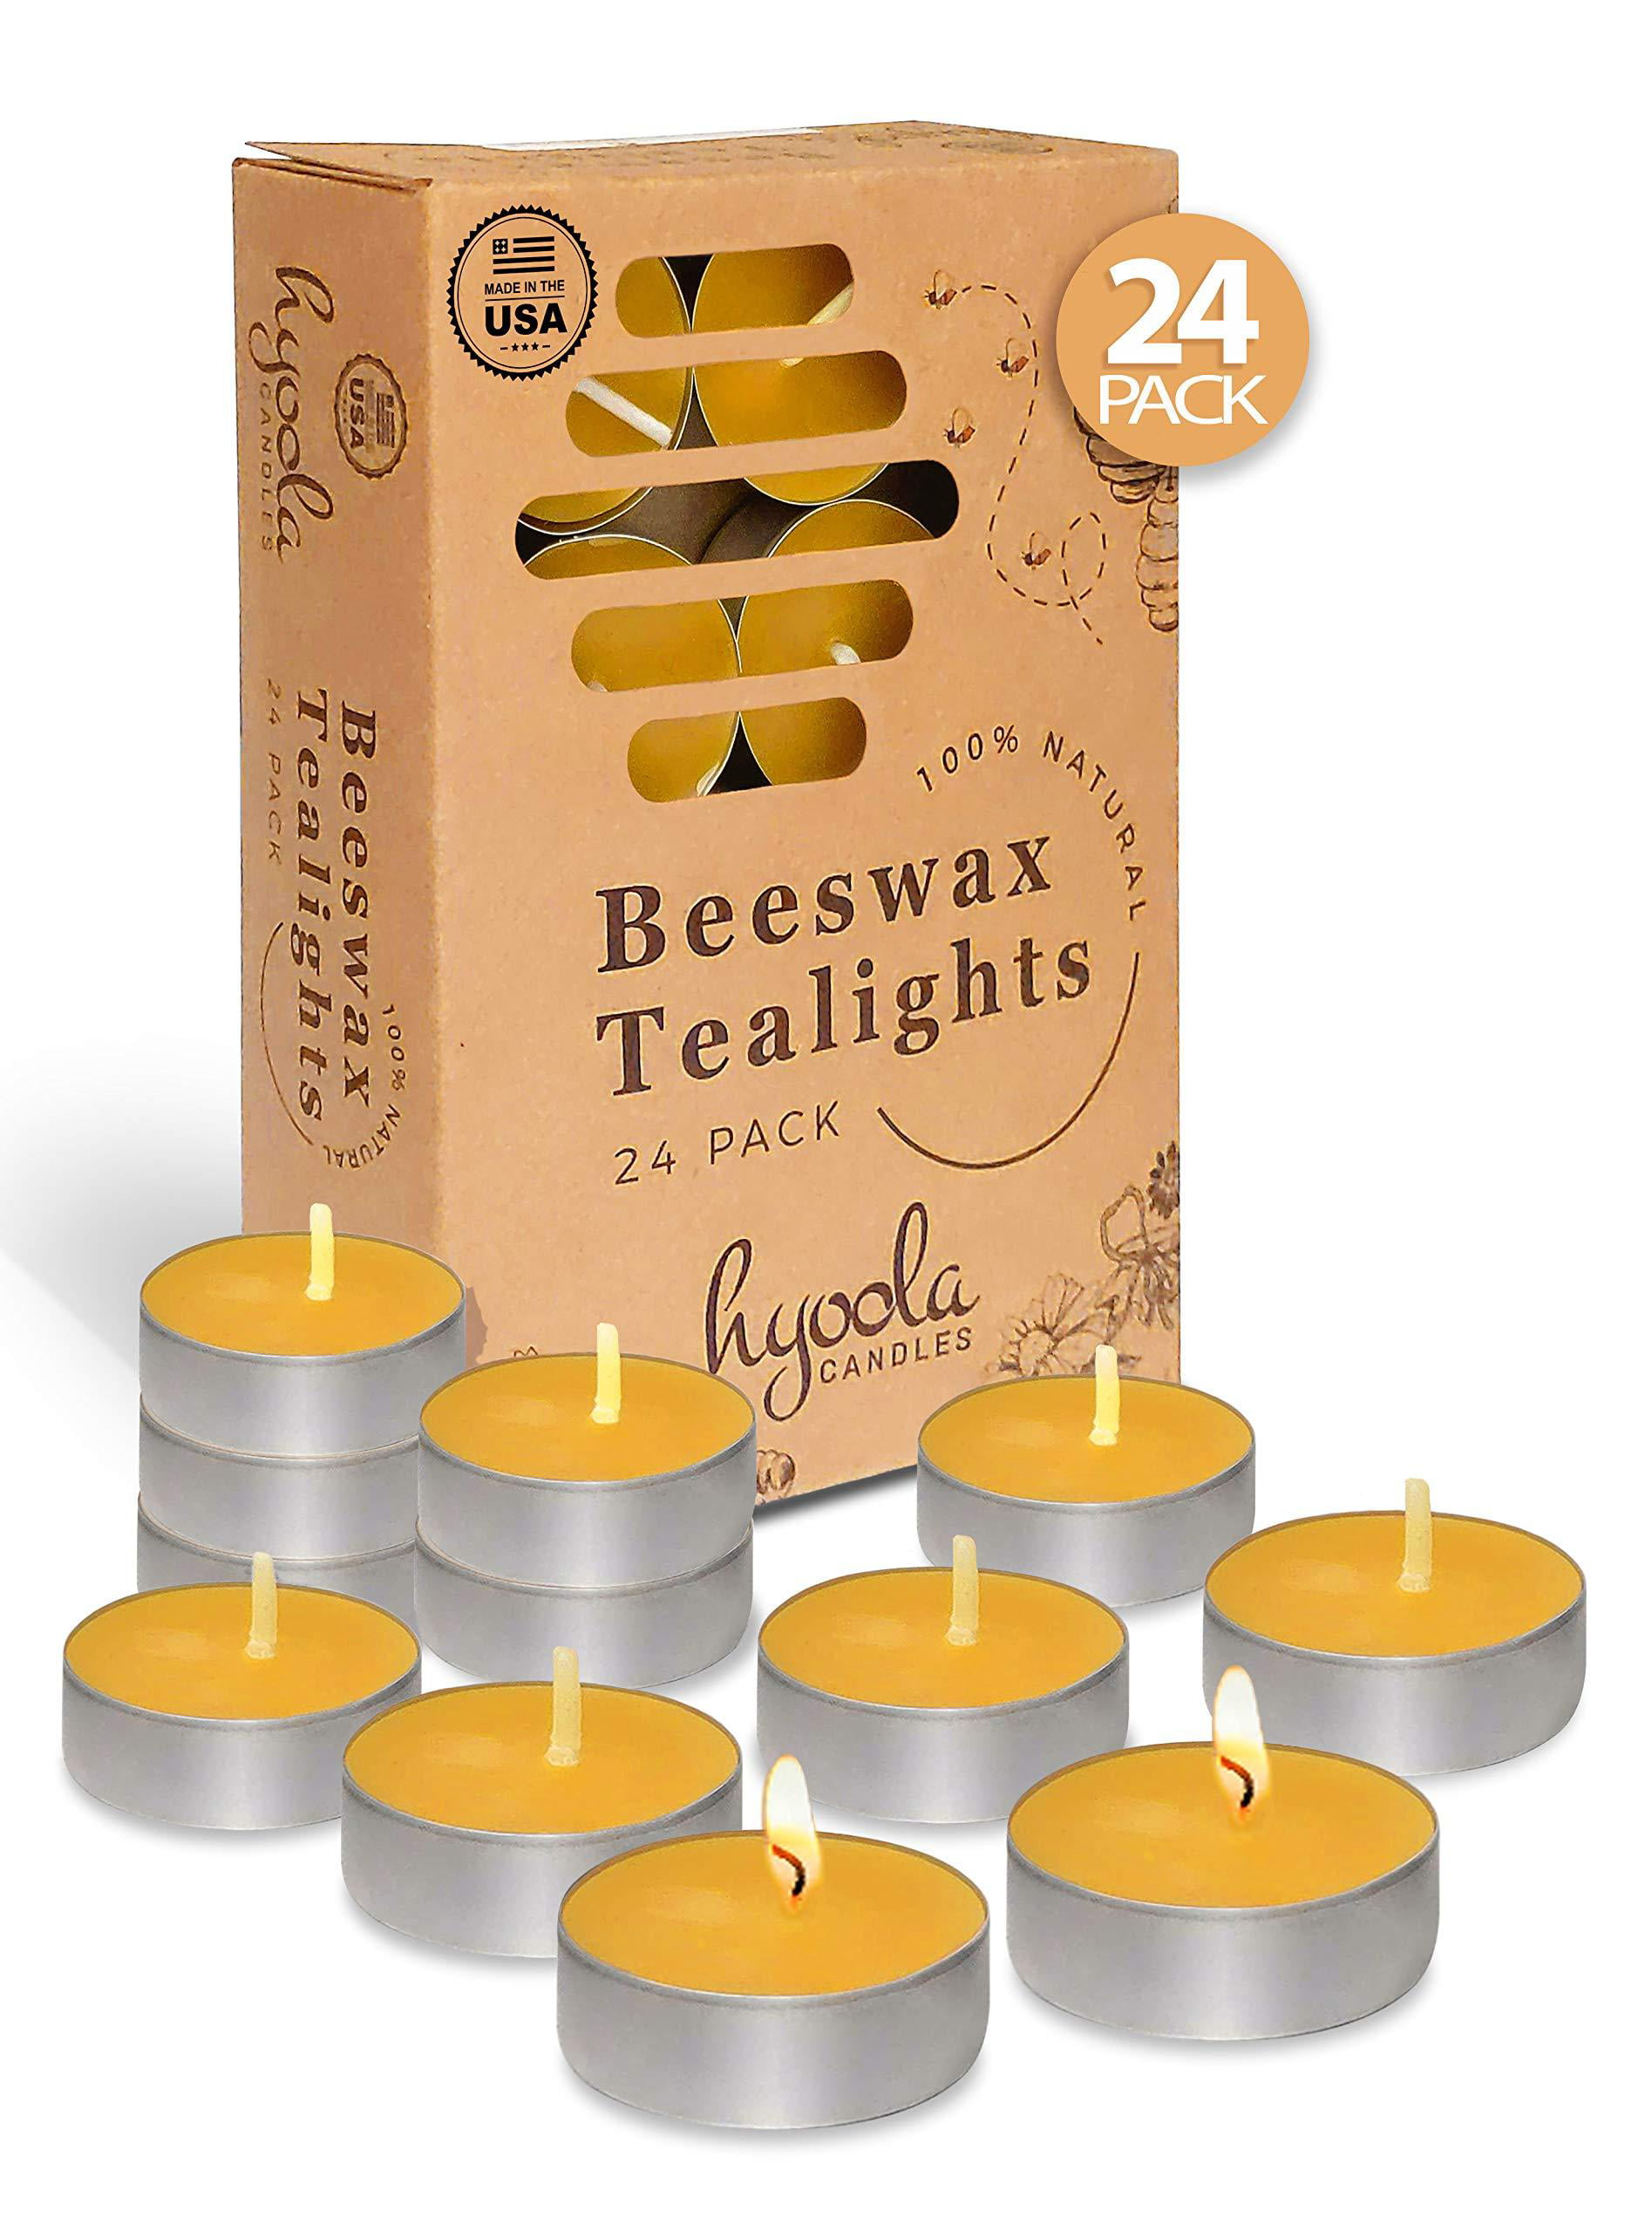 8 pcs/lot Handmade Natural Rolled Romance Atmosphere Beeswax Home Bright Candle 